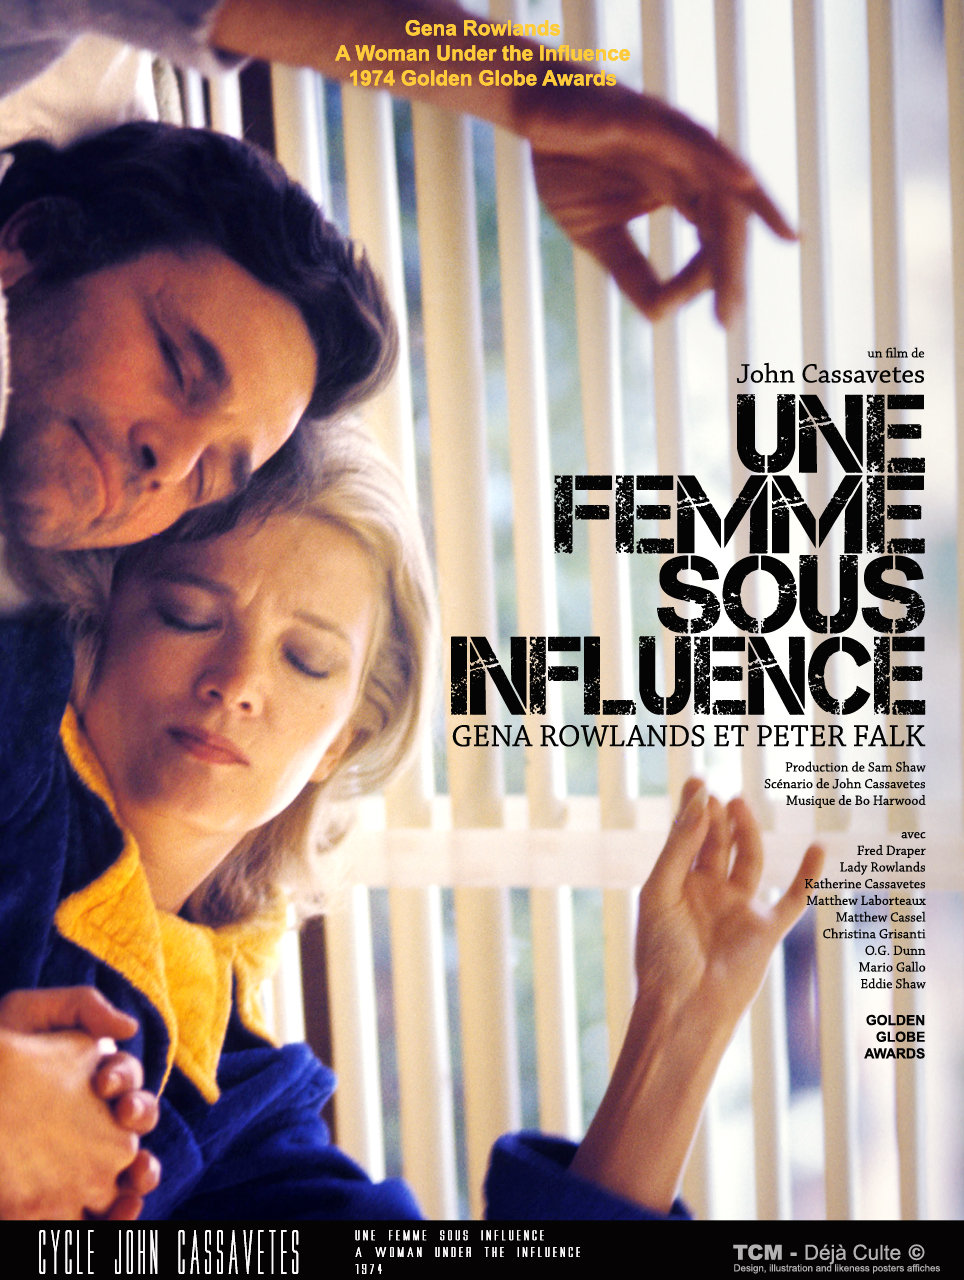 Being Yourself in John Cassavetes's “A Woman Under the Influence